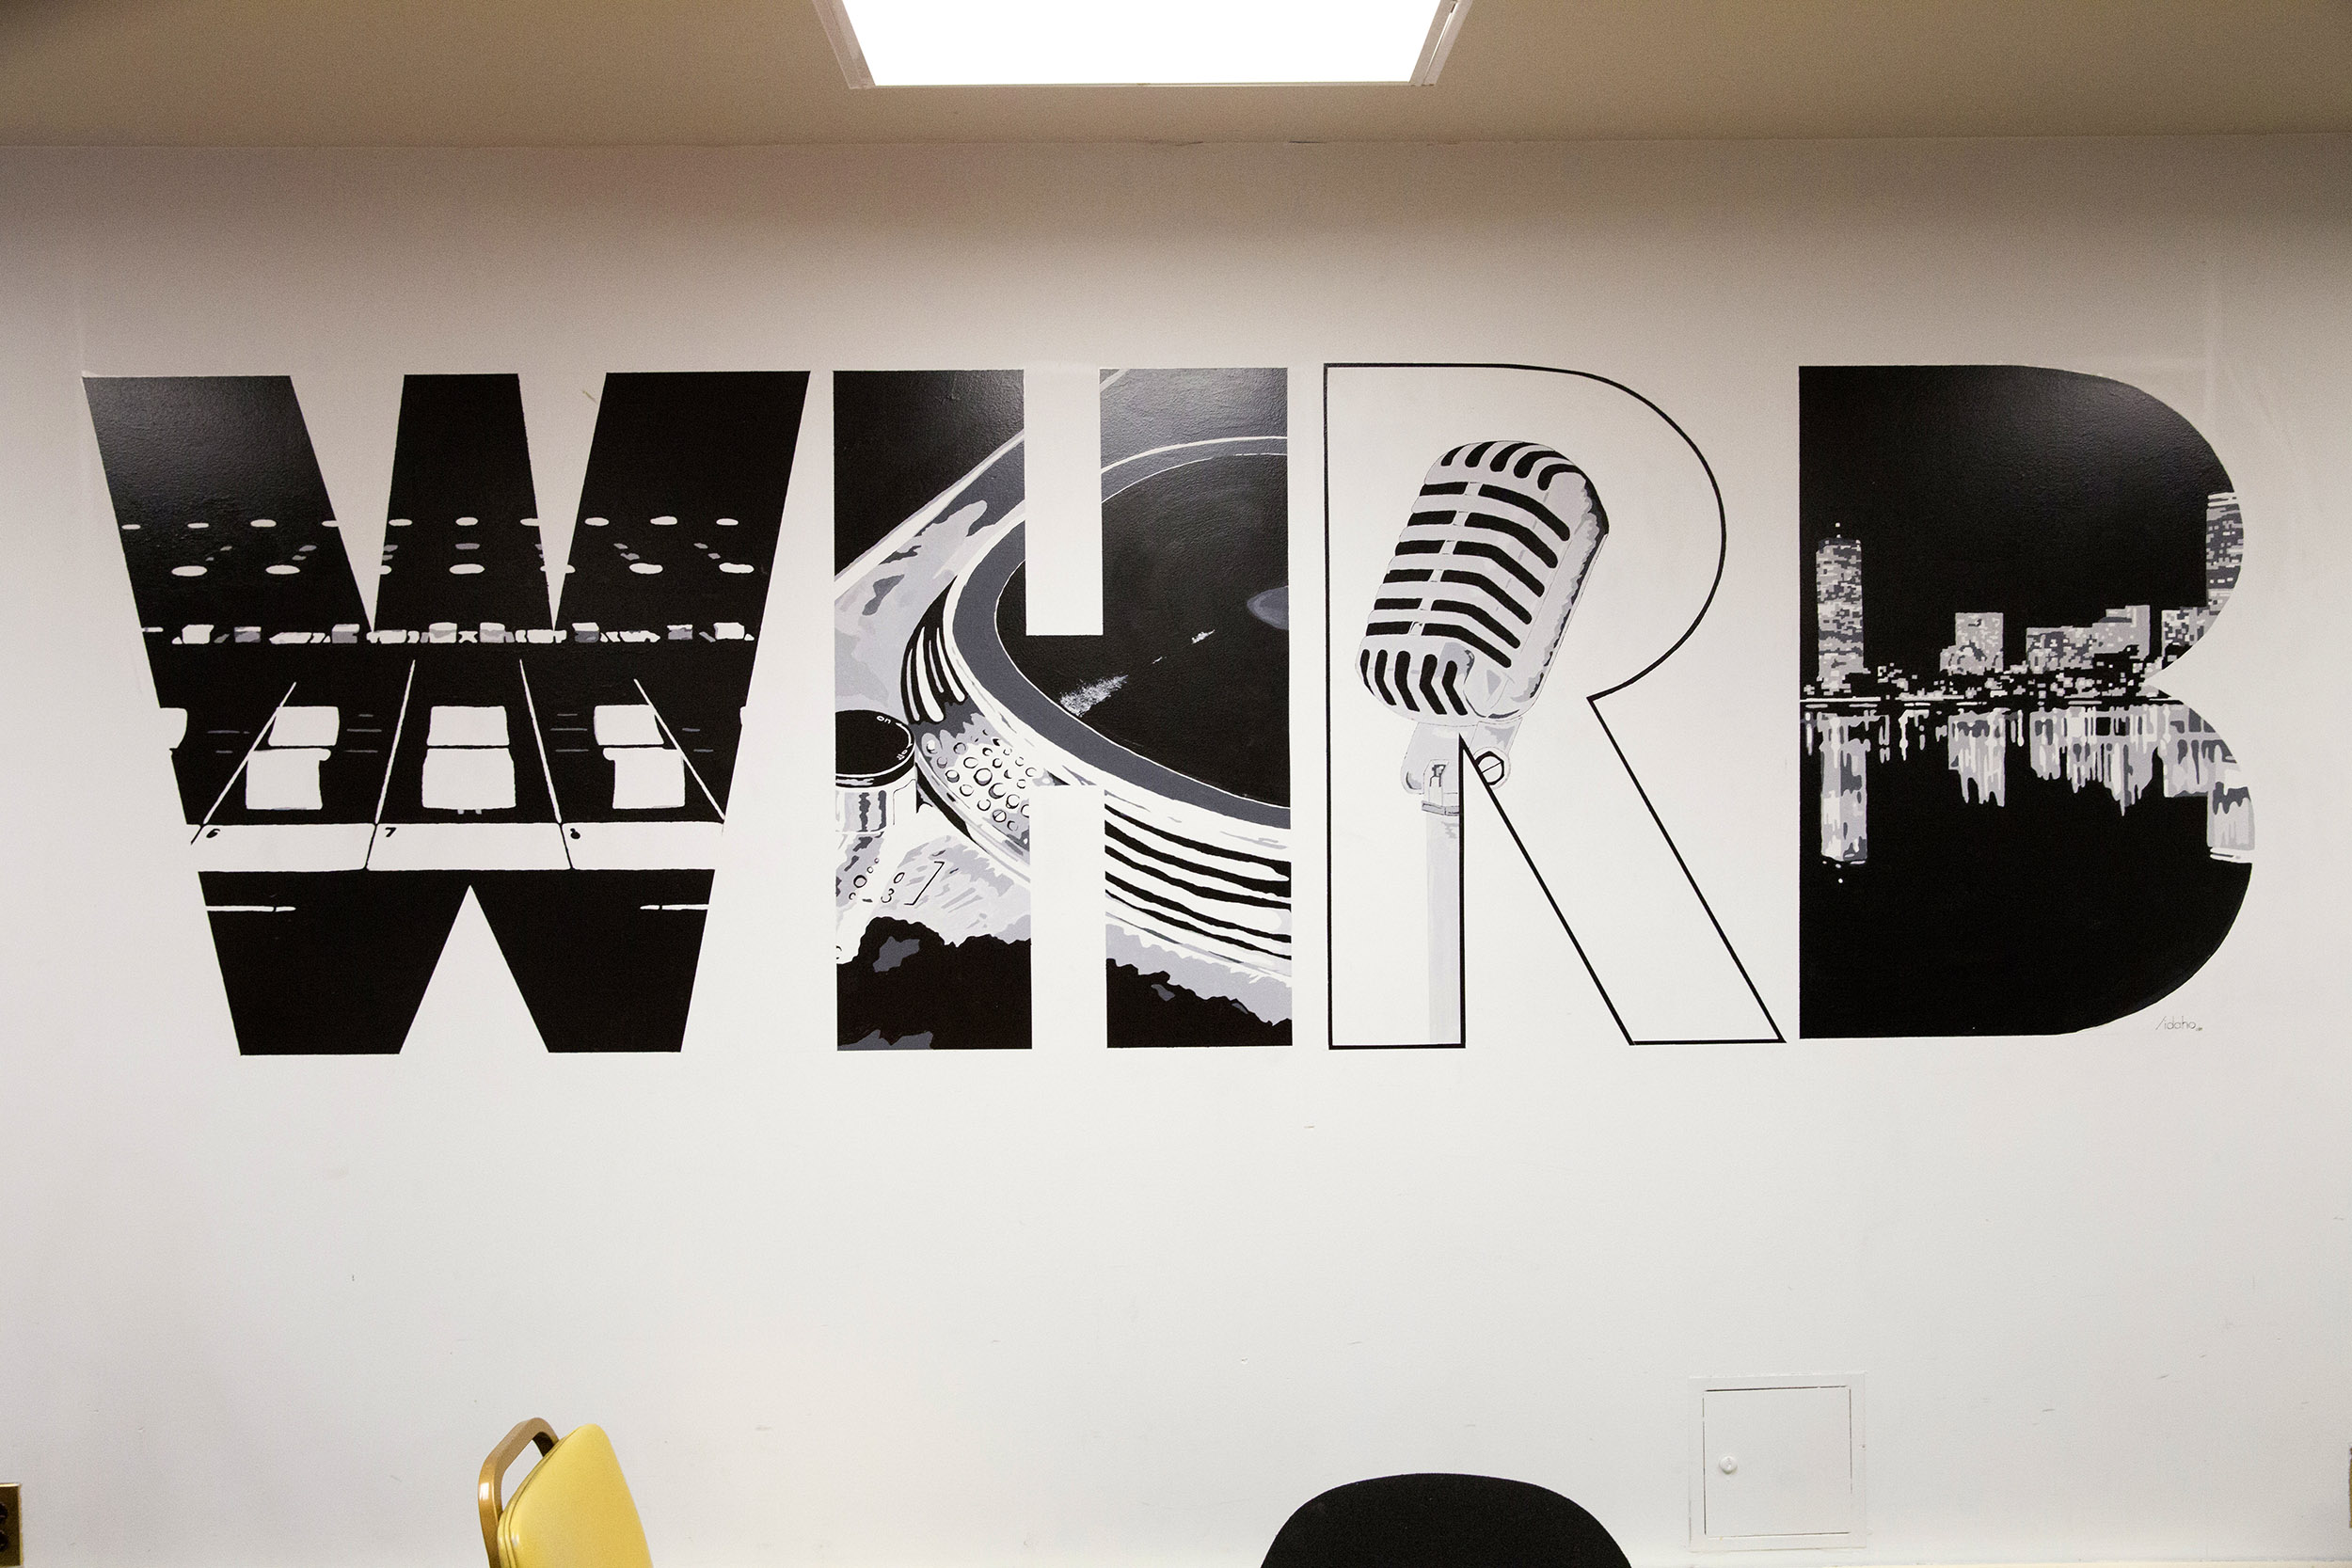 WHRB, 95.3FM, Harvard Radio station's call letters provide the graphics for its studio walls.